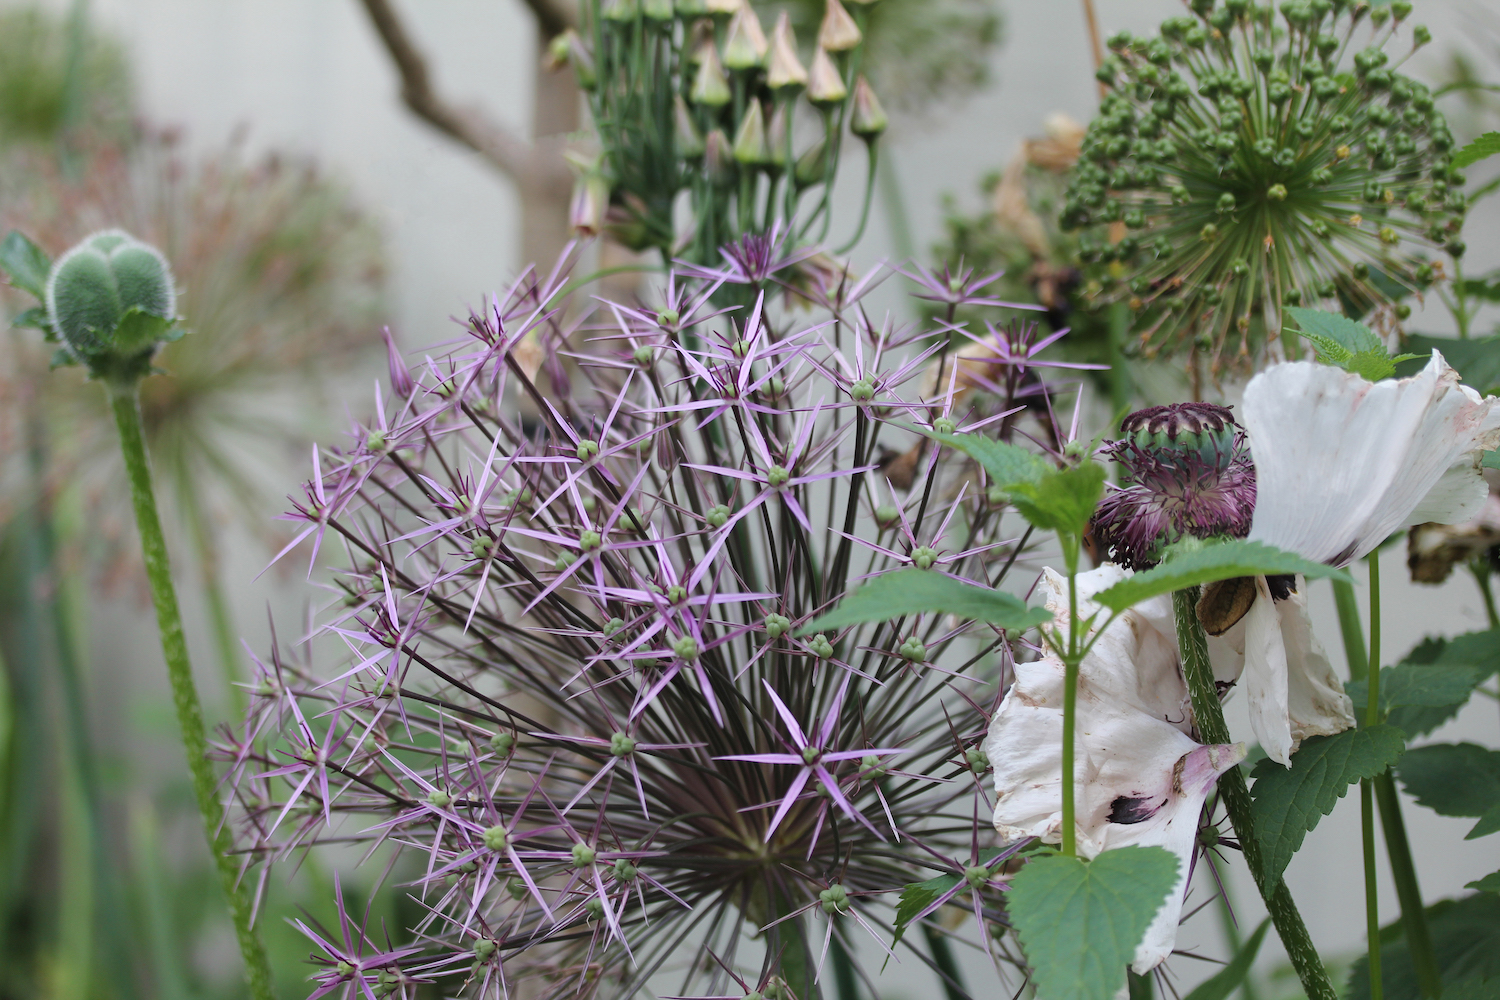 Close up shot of Allium head and cut flowers from productive garden